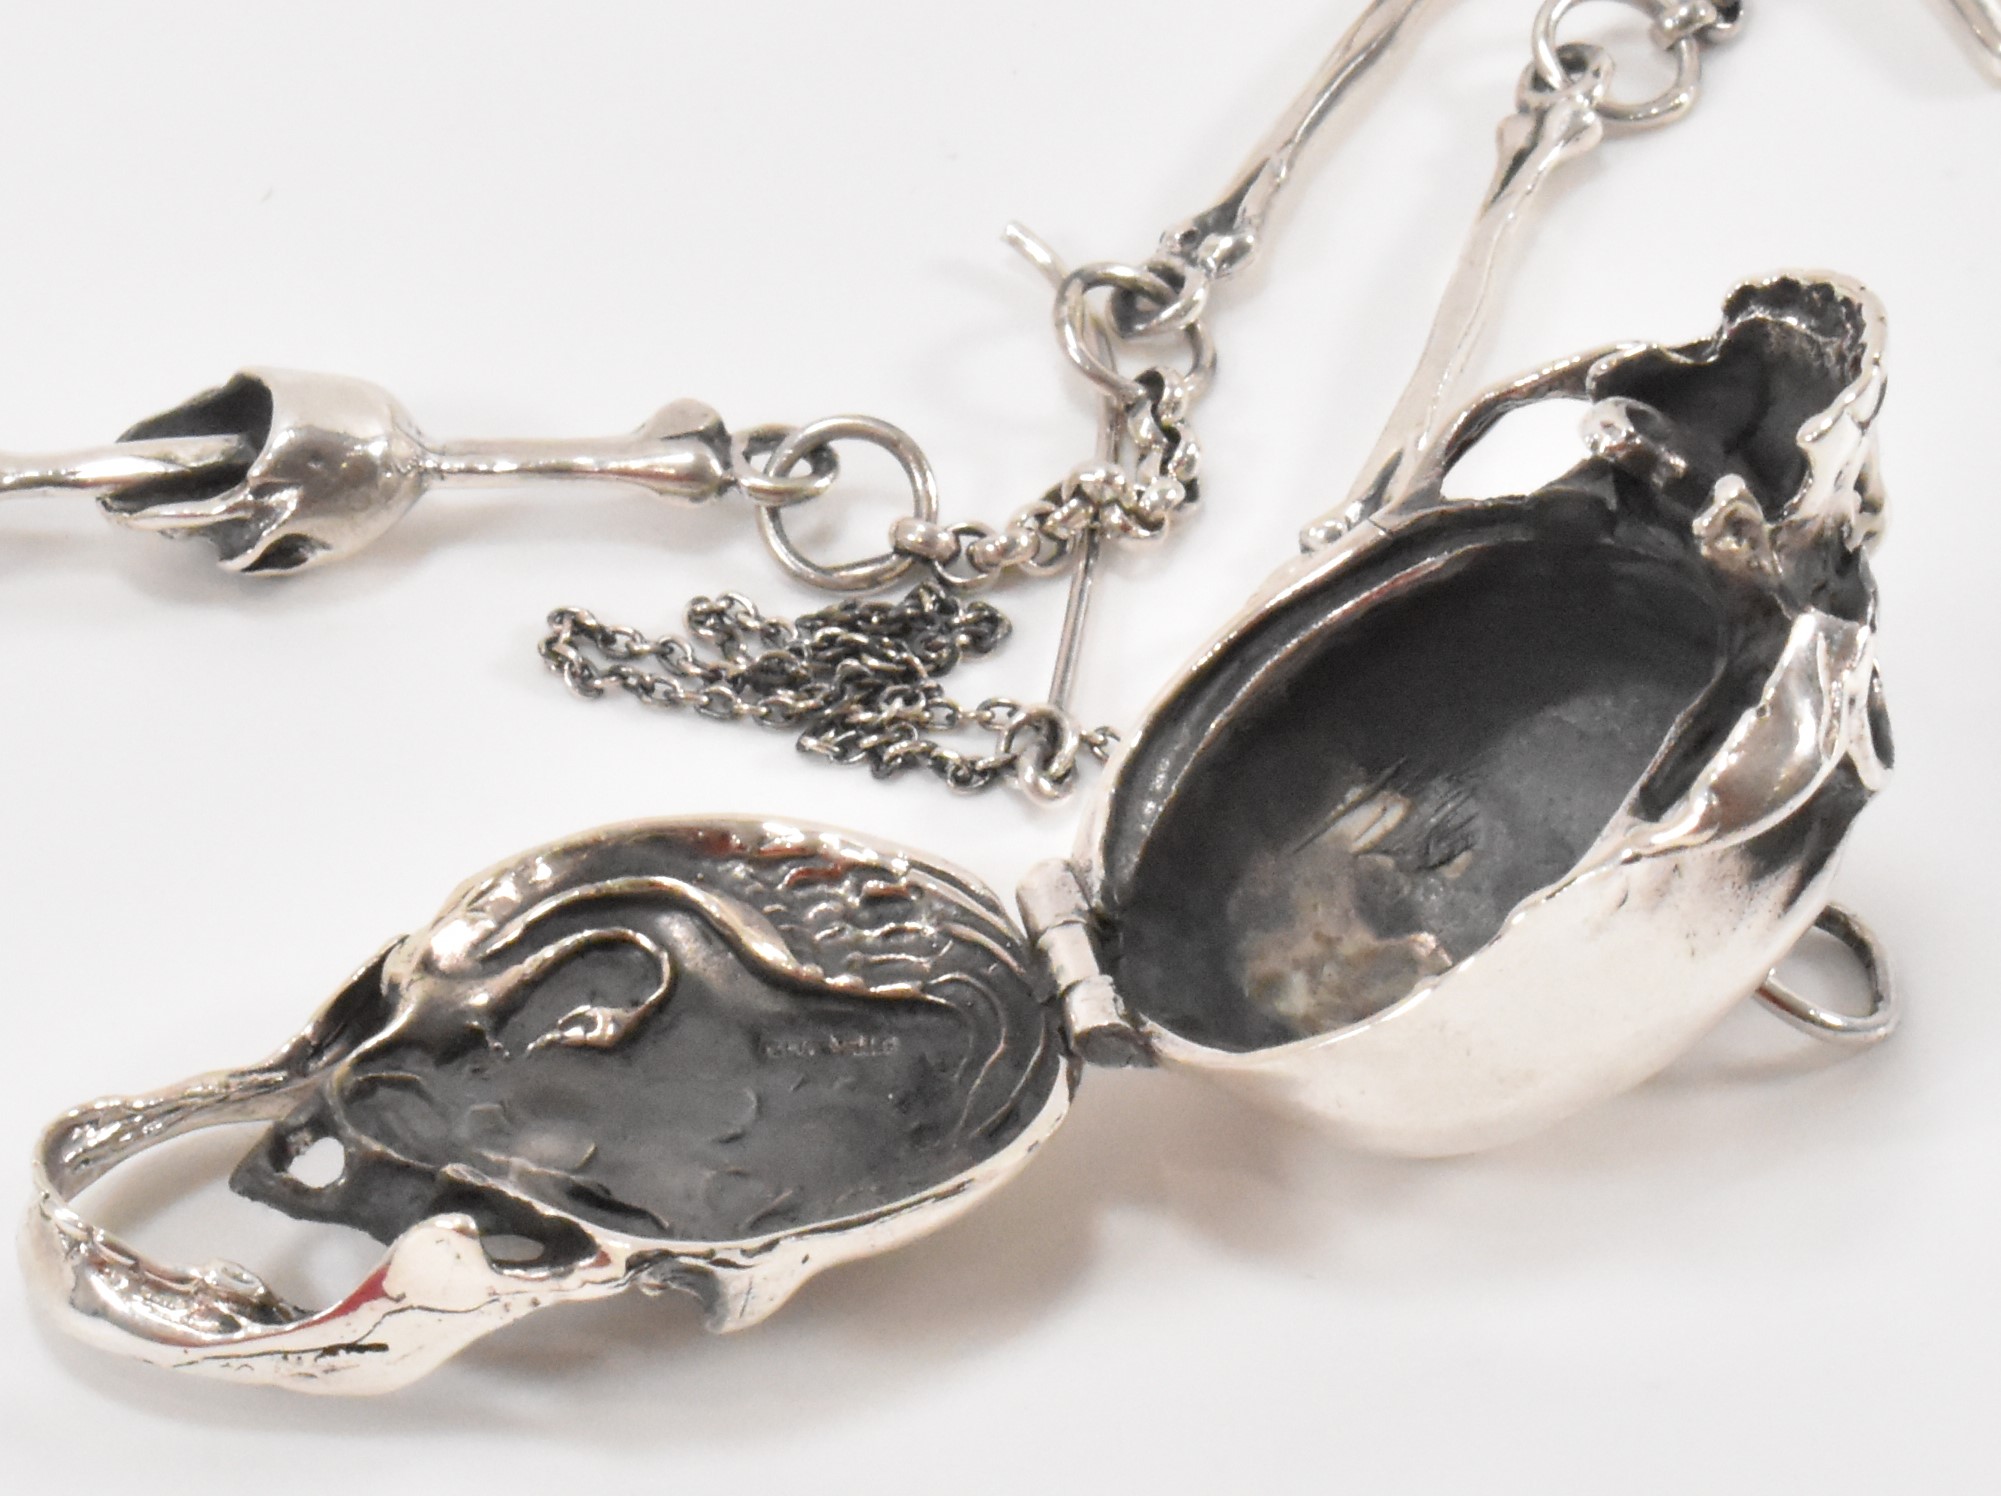 SILVER SKELETON POCKET WATCH CHAIN - Image 3 of 3